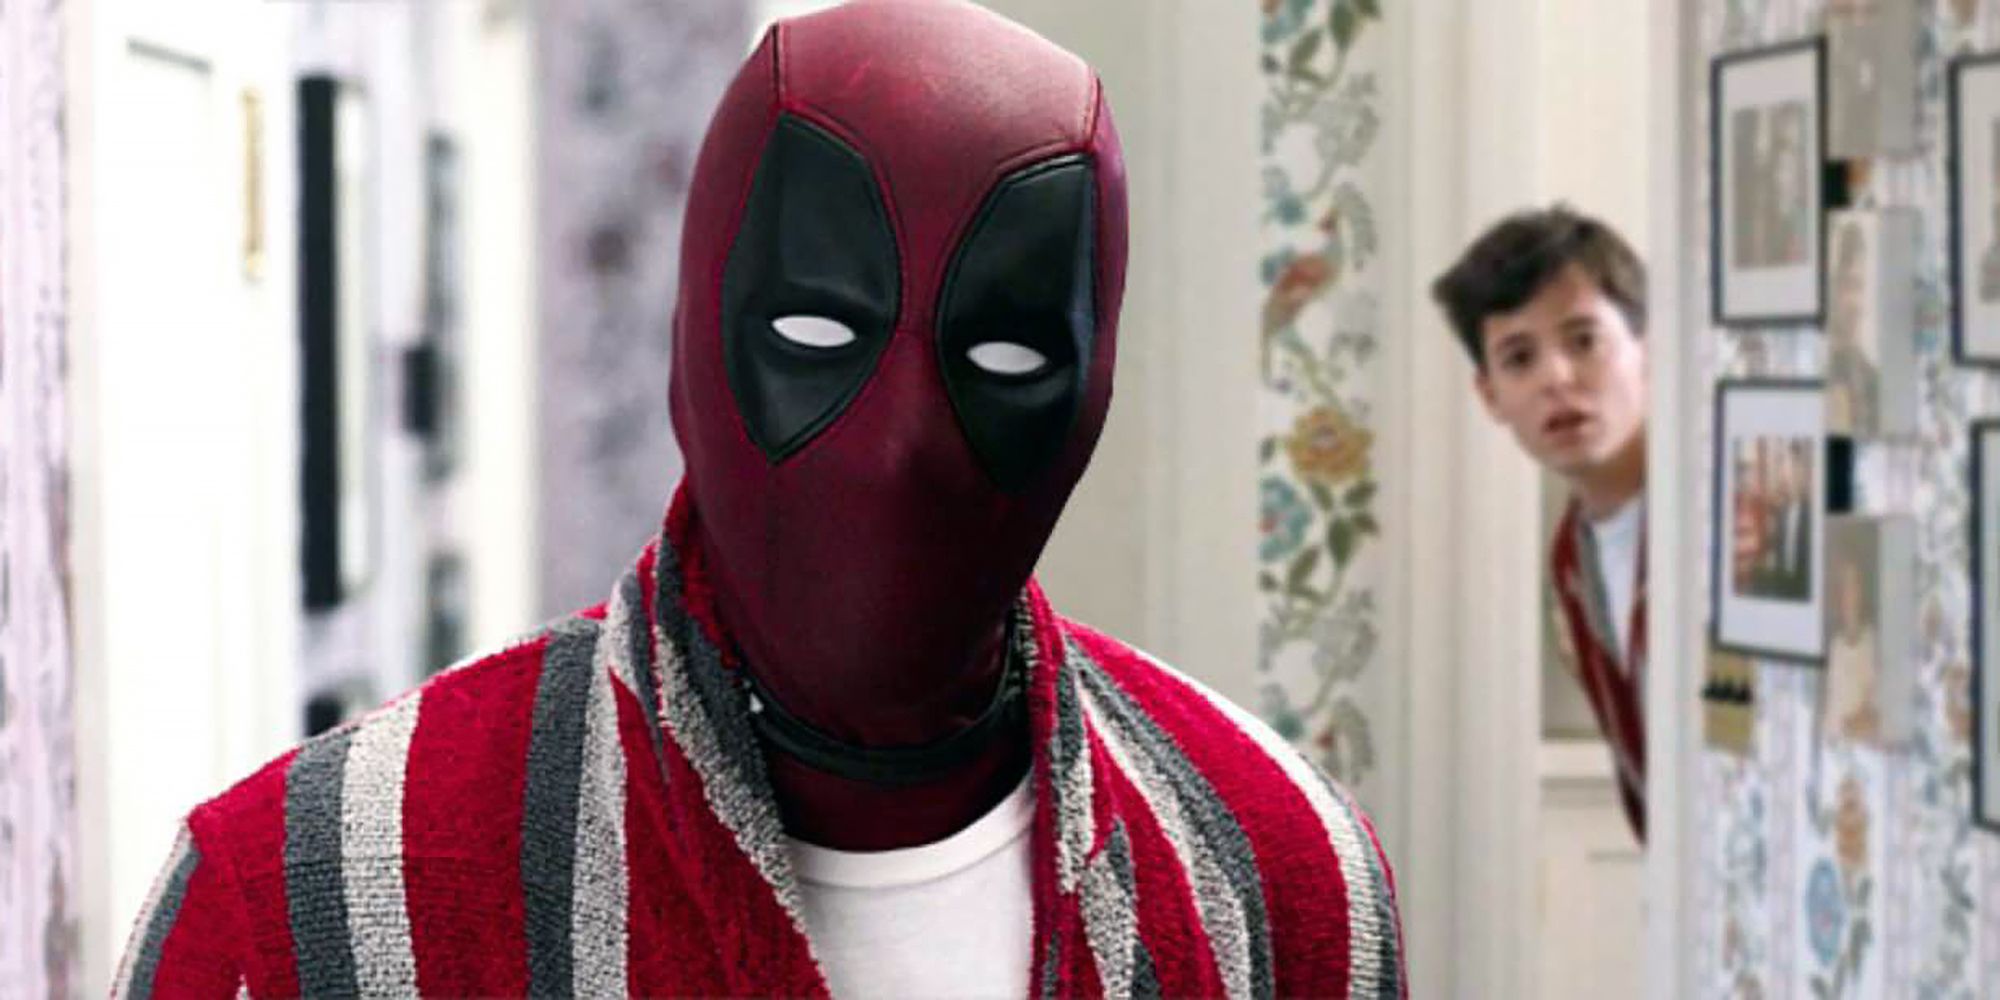 'Deadpool' is renowned for its fourth wall breakages, adding to its pop culture relevance